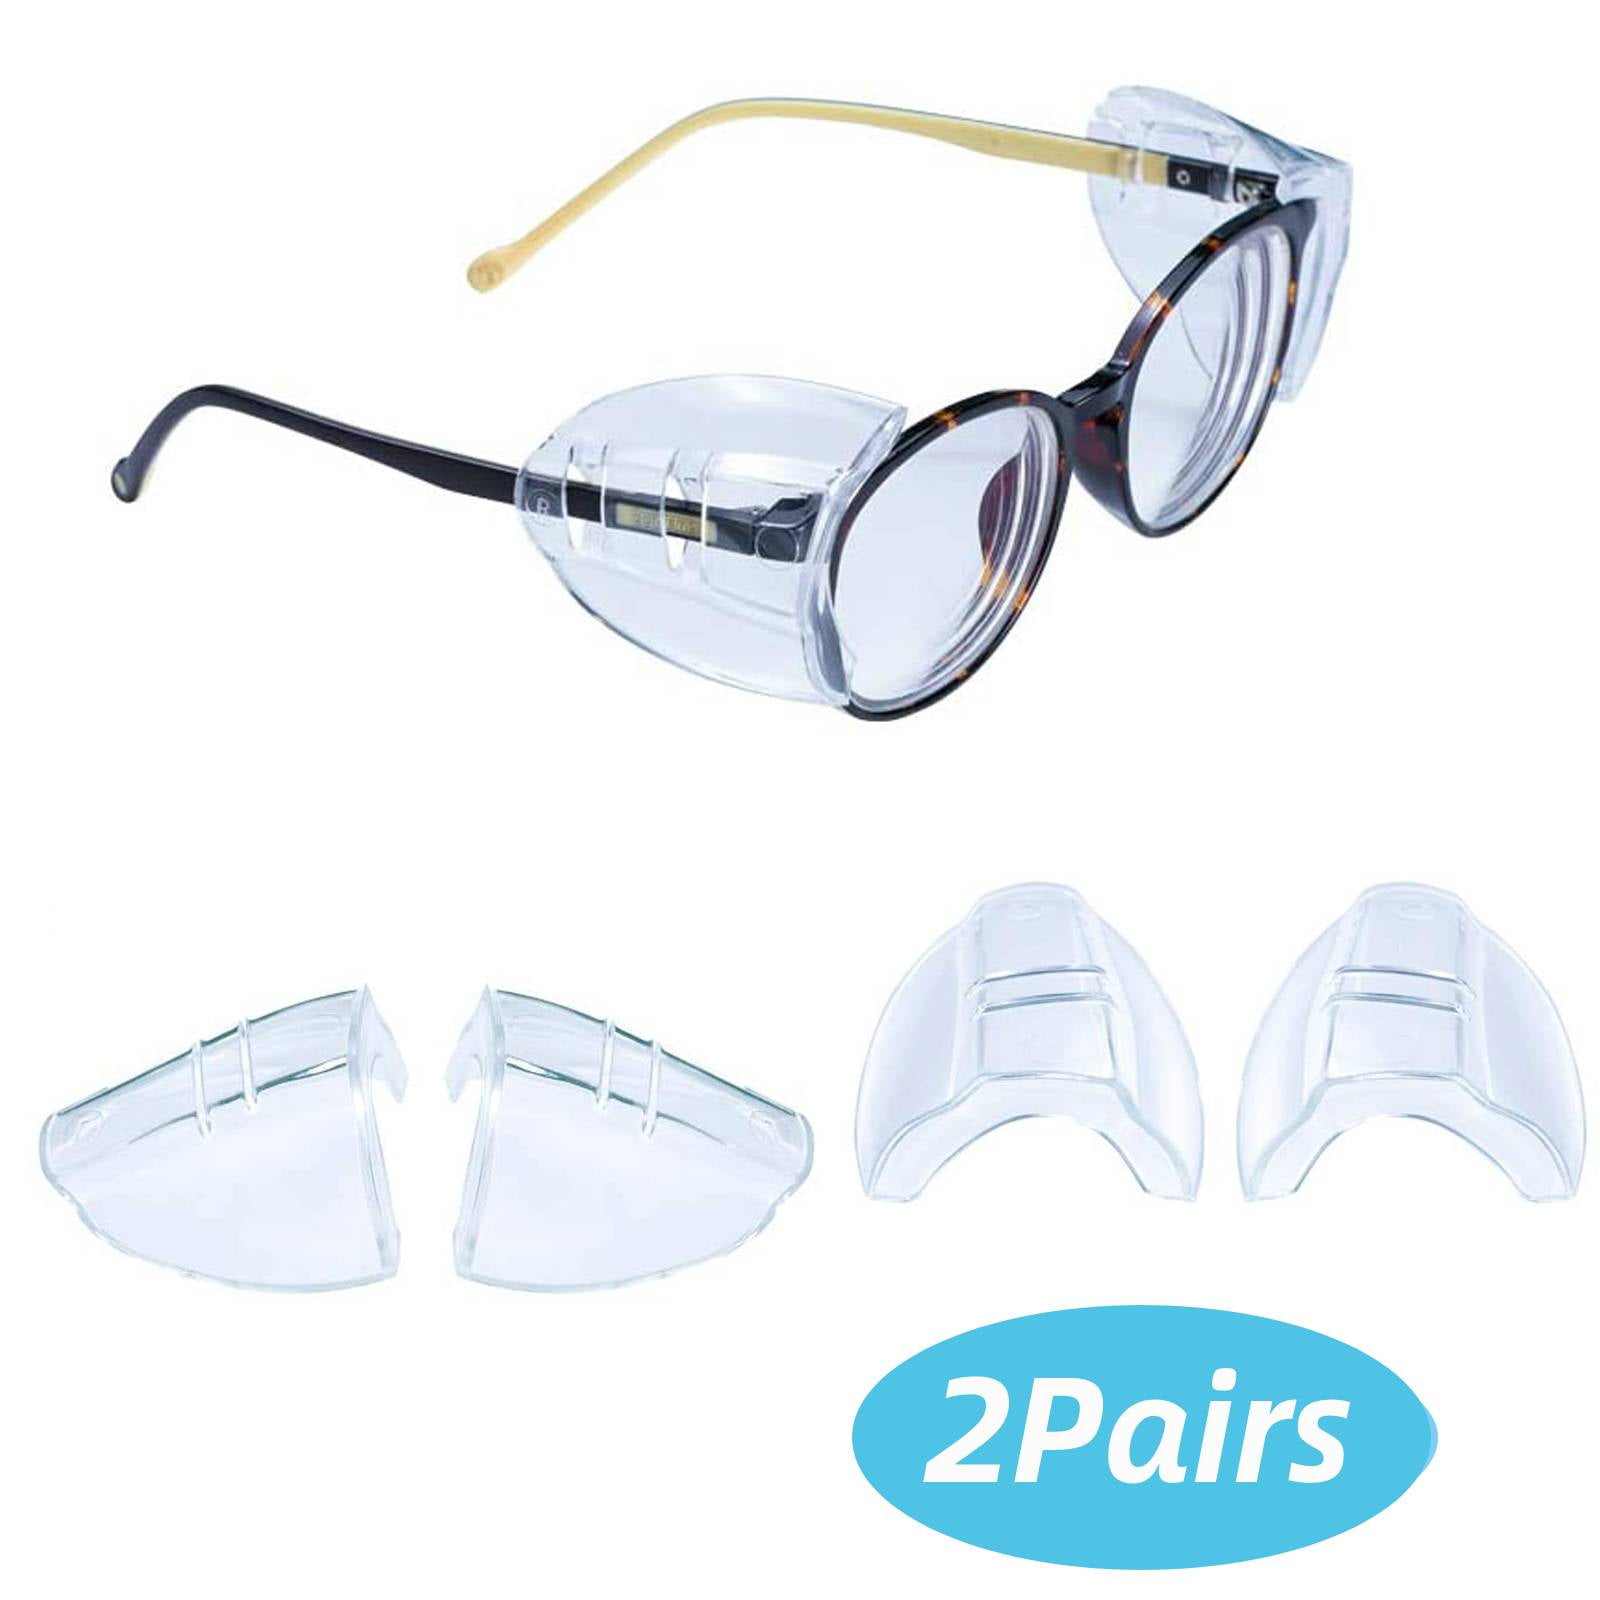 6 Pair Safety Eye Glasses Side Shields Clear Flexible Slip On Shield Fits 